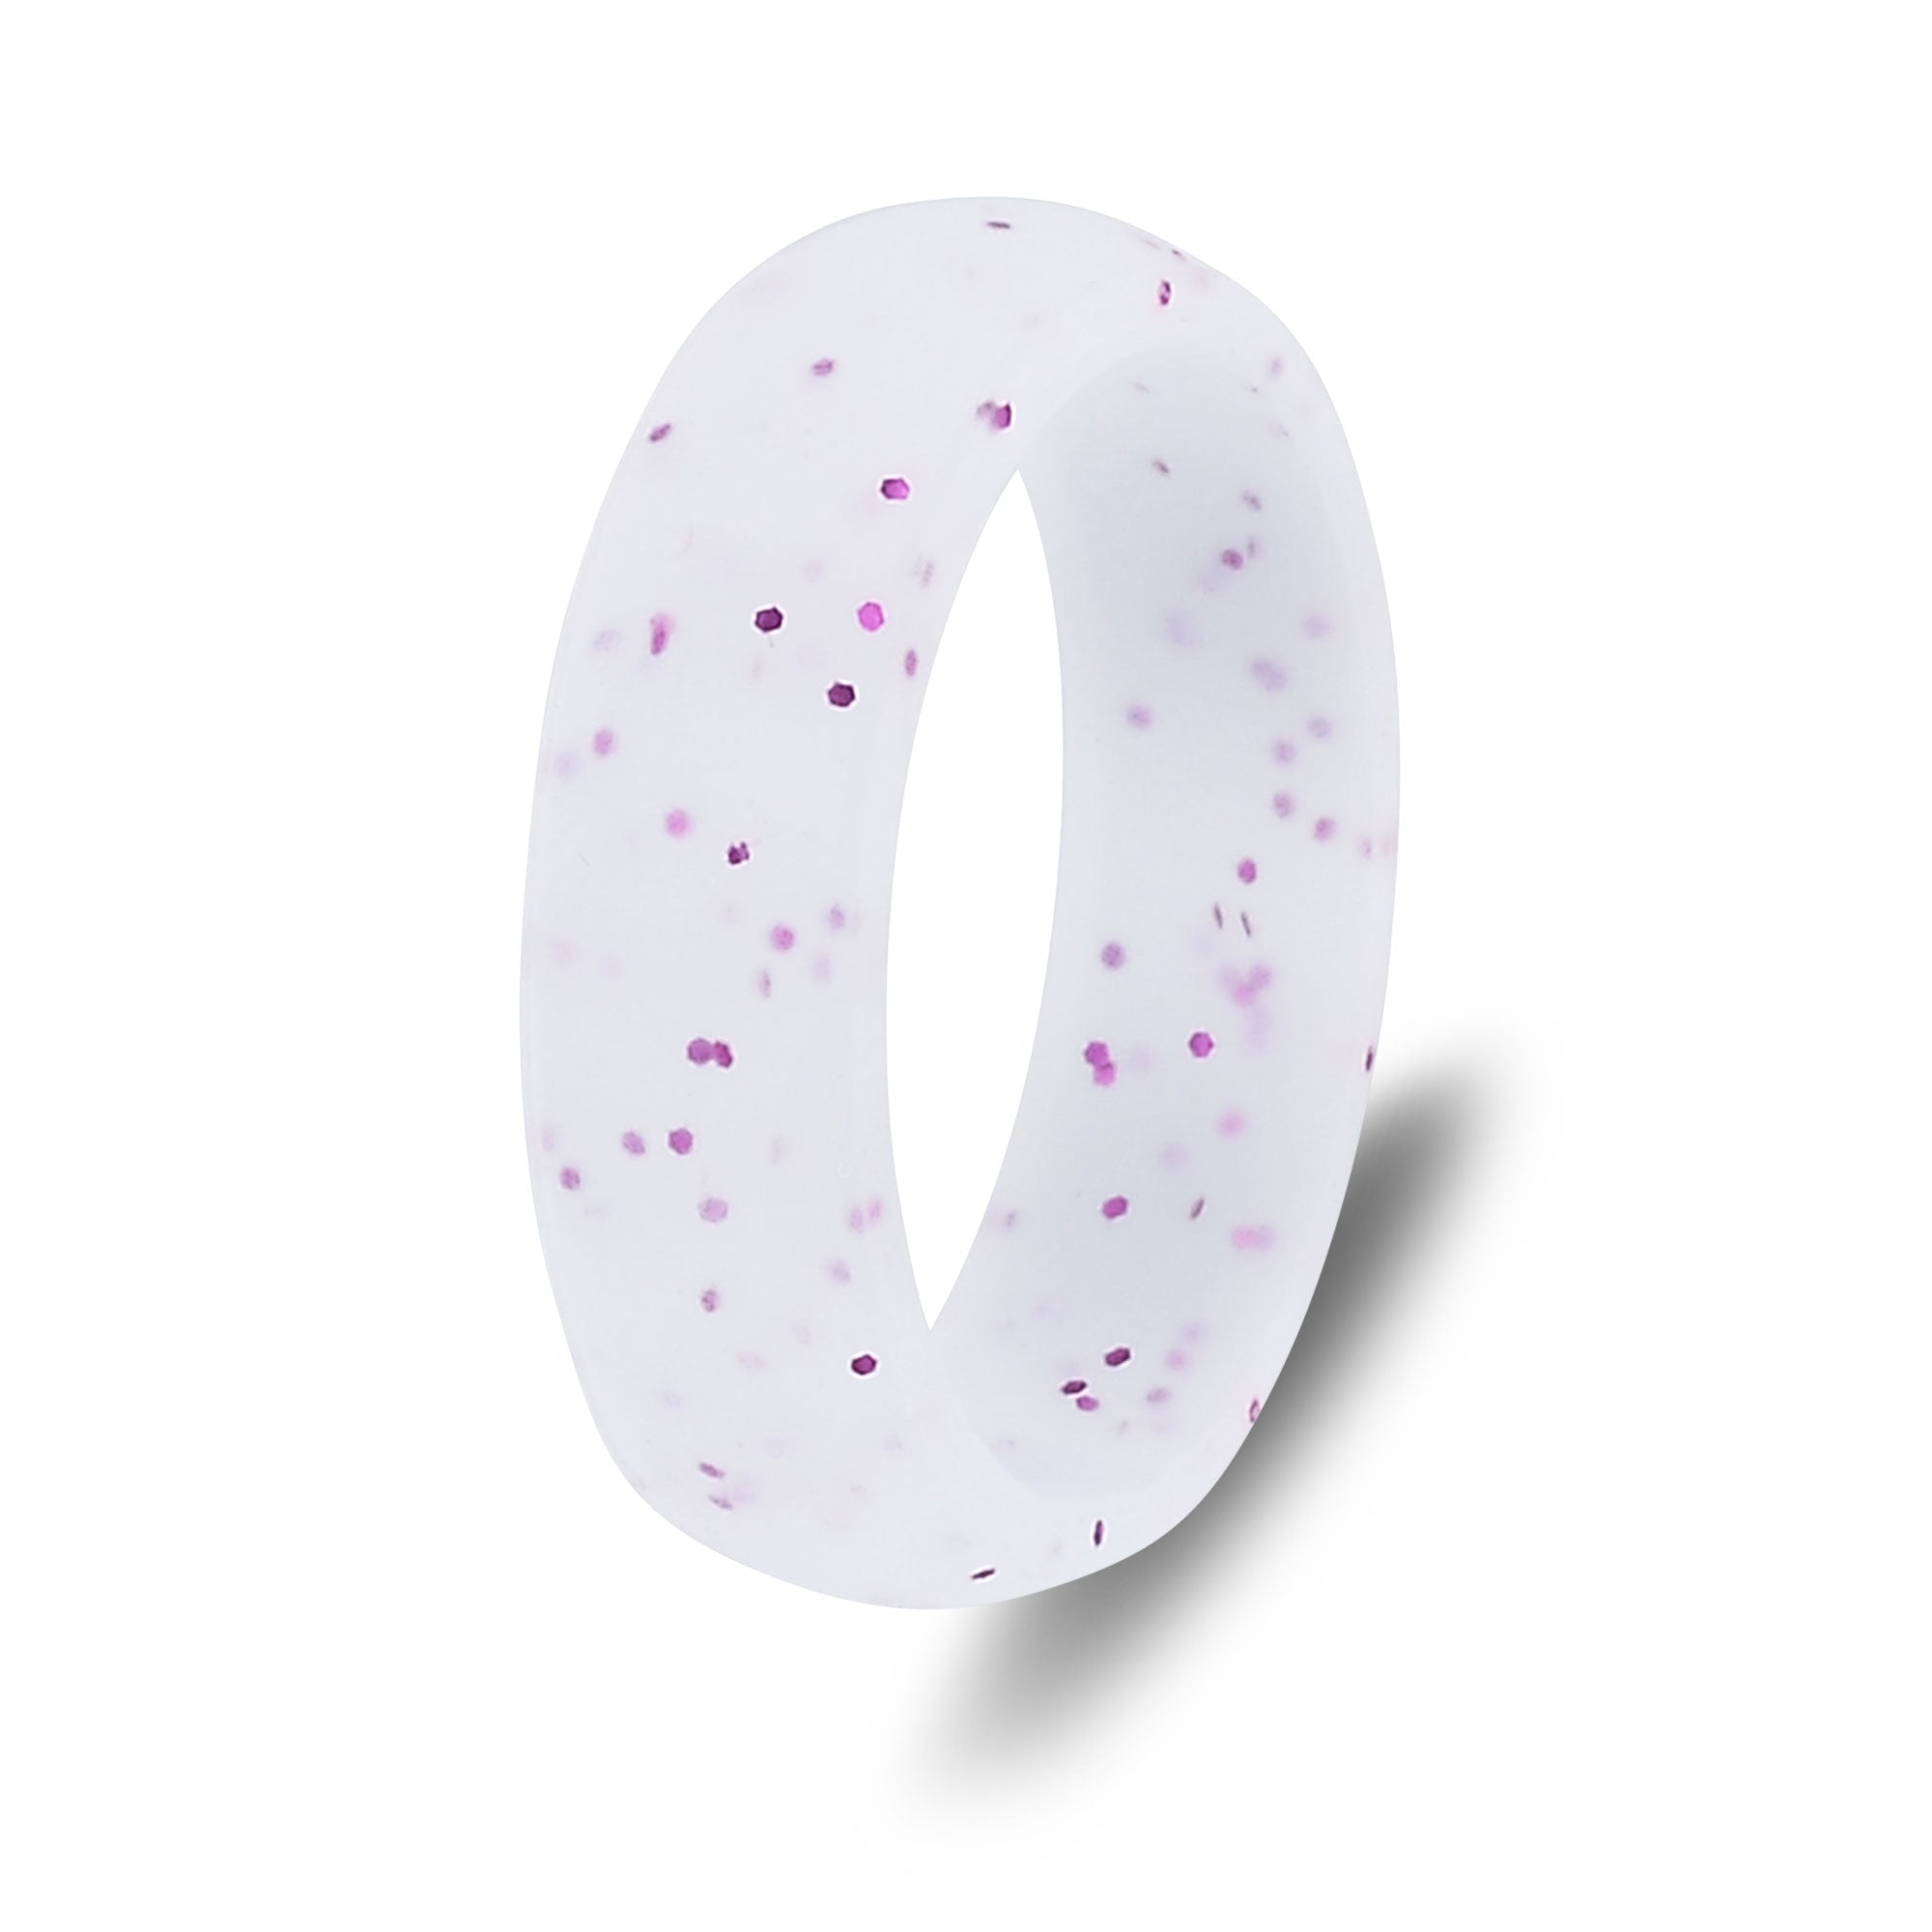 The Snowy Sequin - Silicone Ring